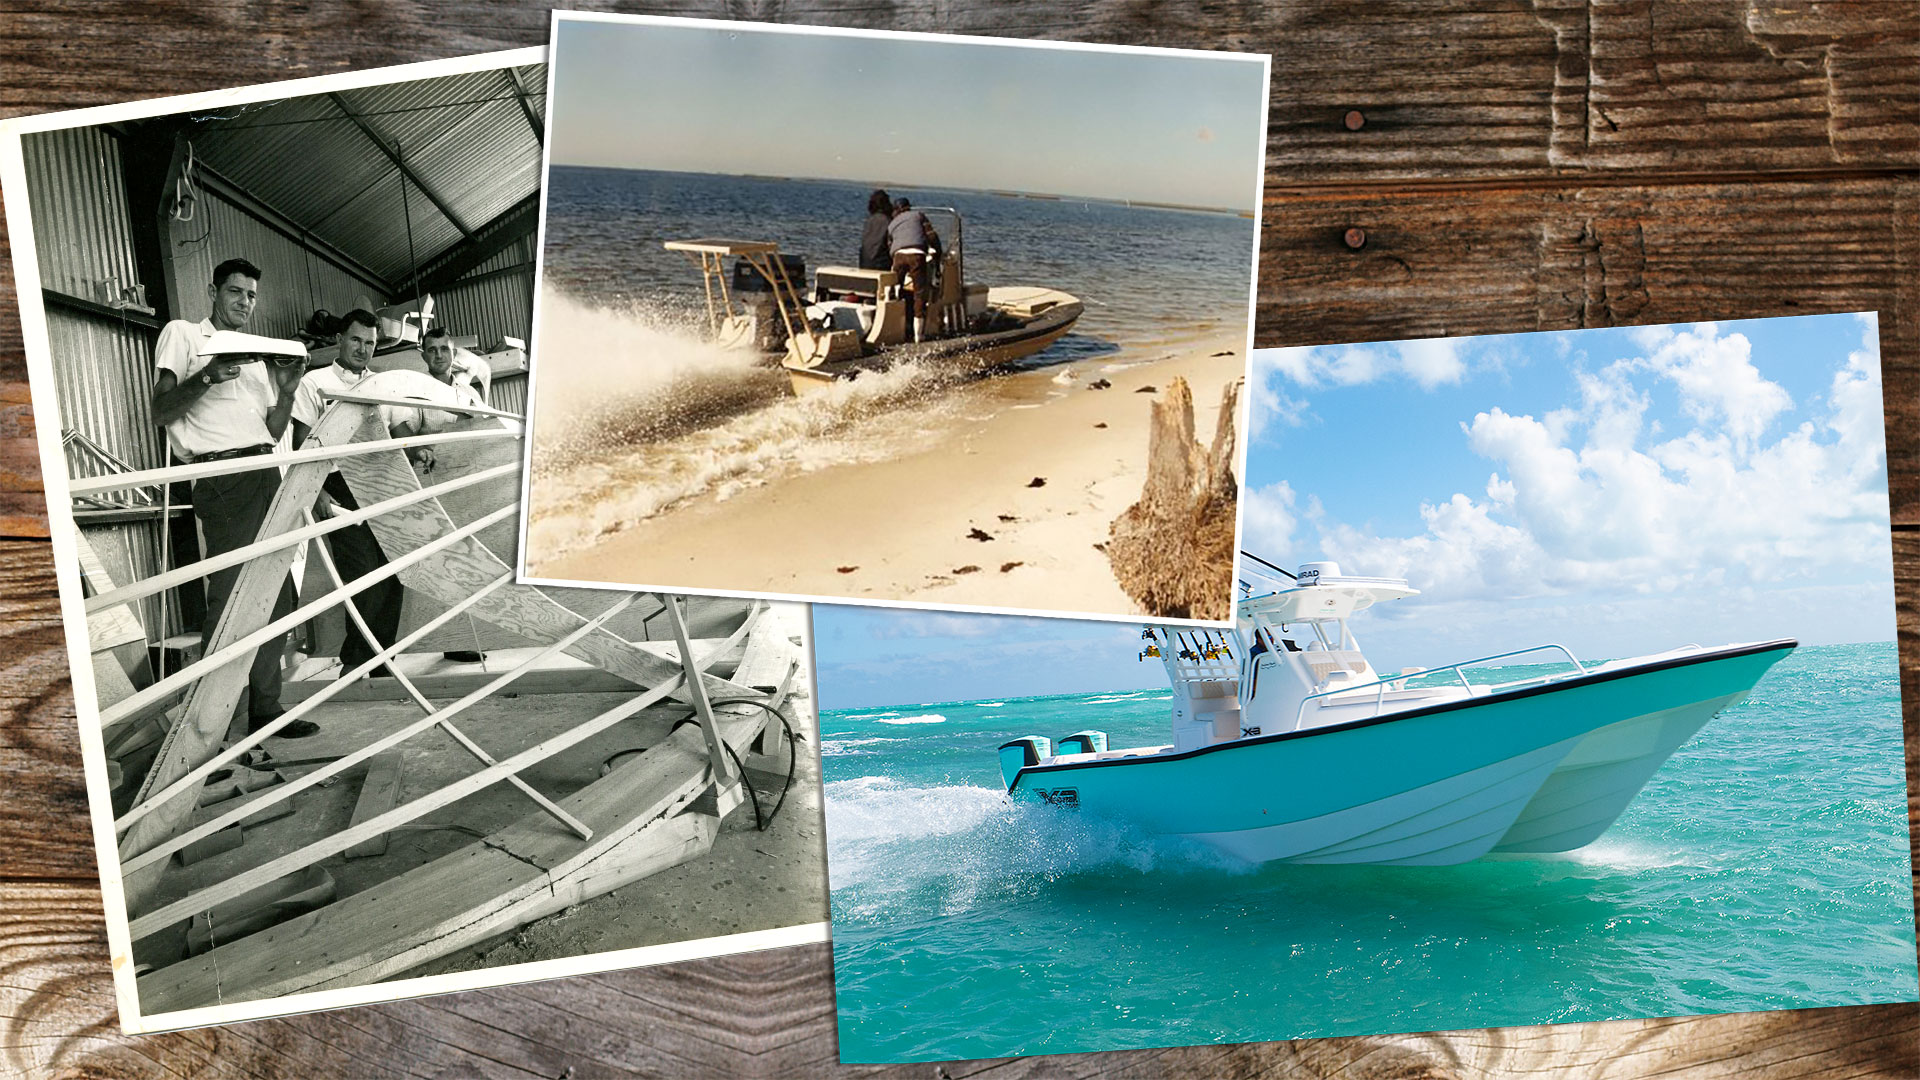 About Shallow Sport Boats Legendary Shallow Water Fishing Boats